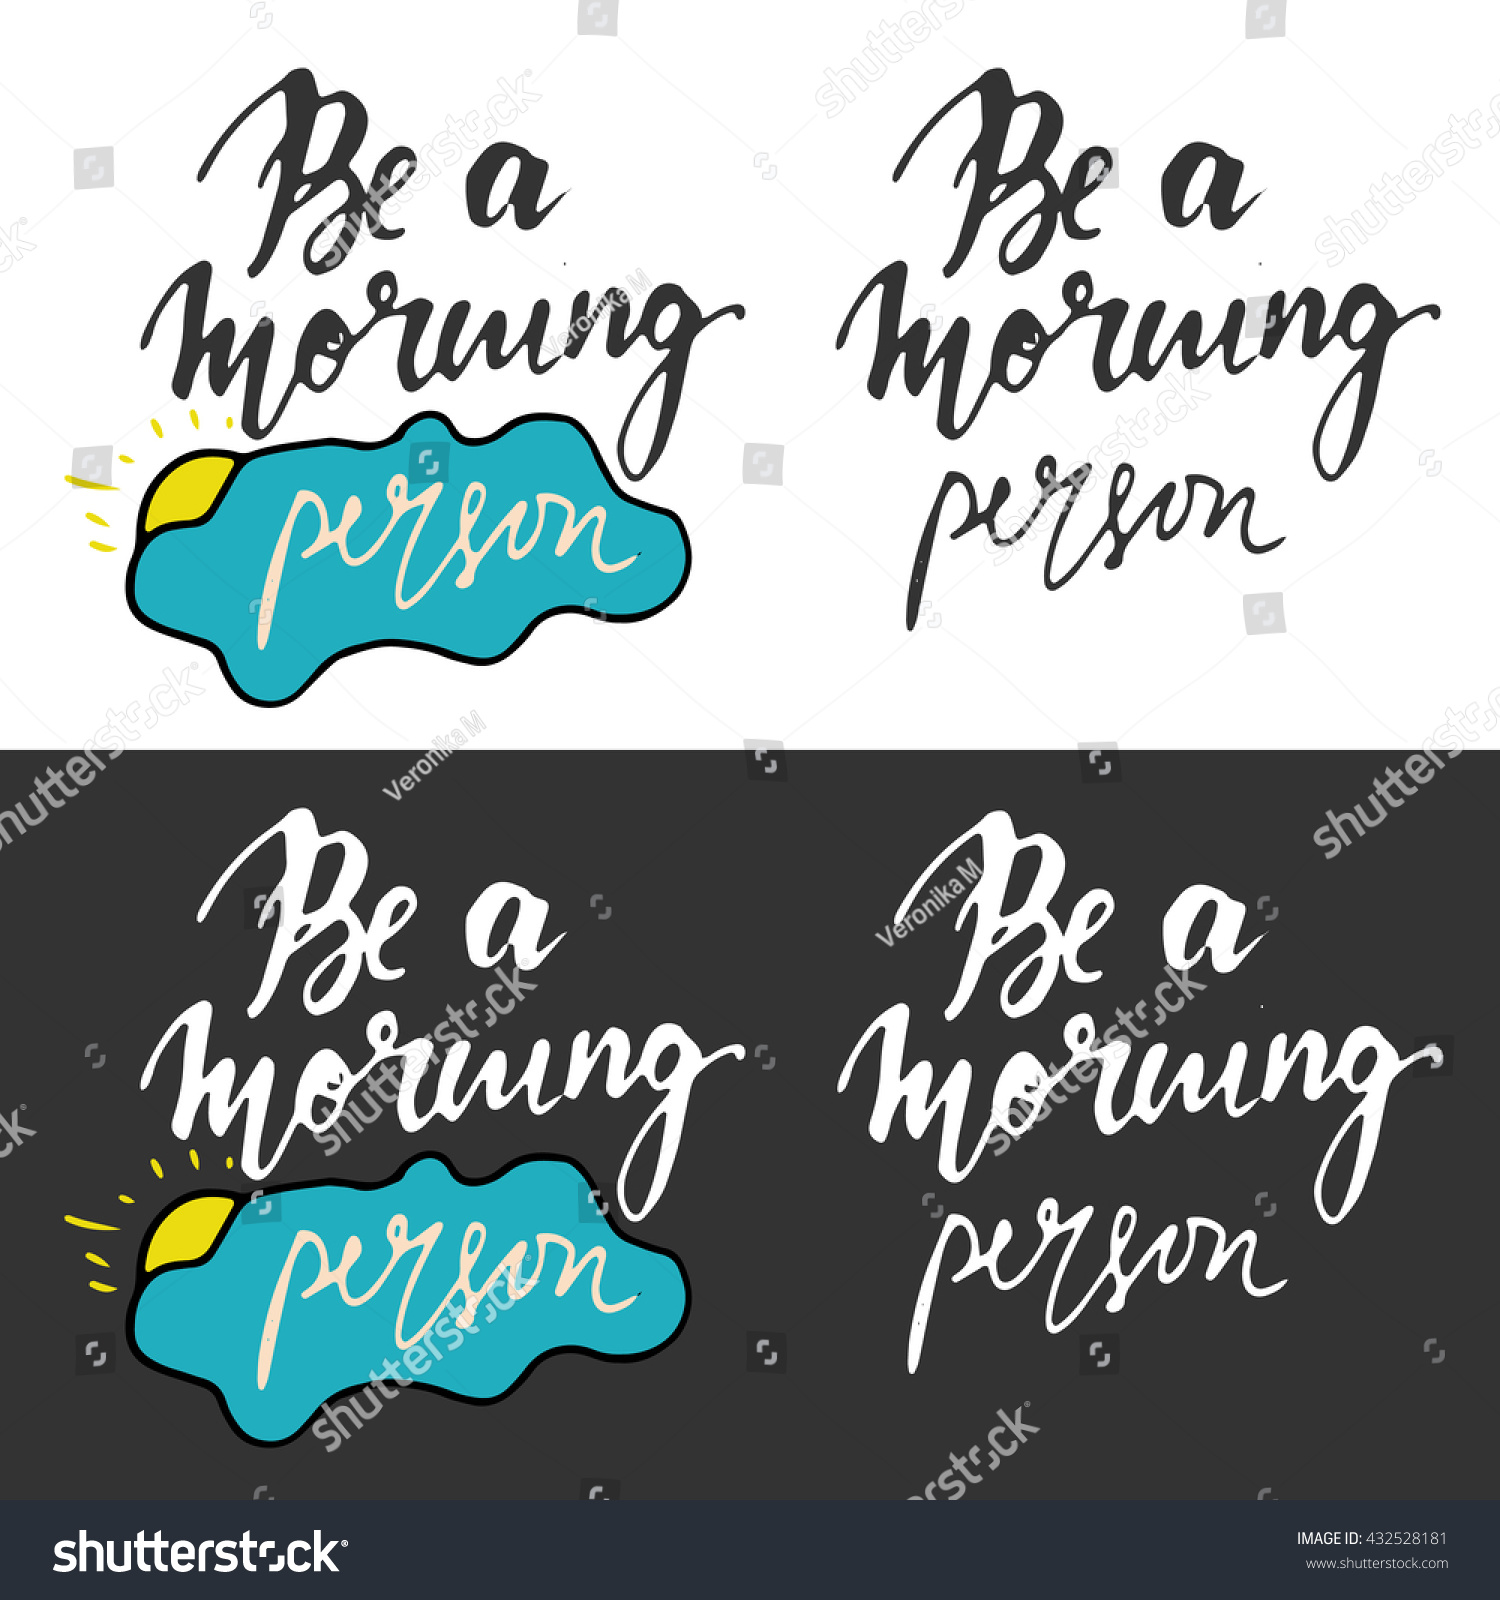 Image result for "morning person" clipart free